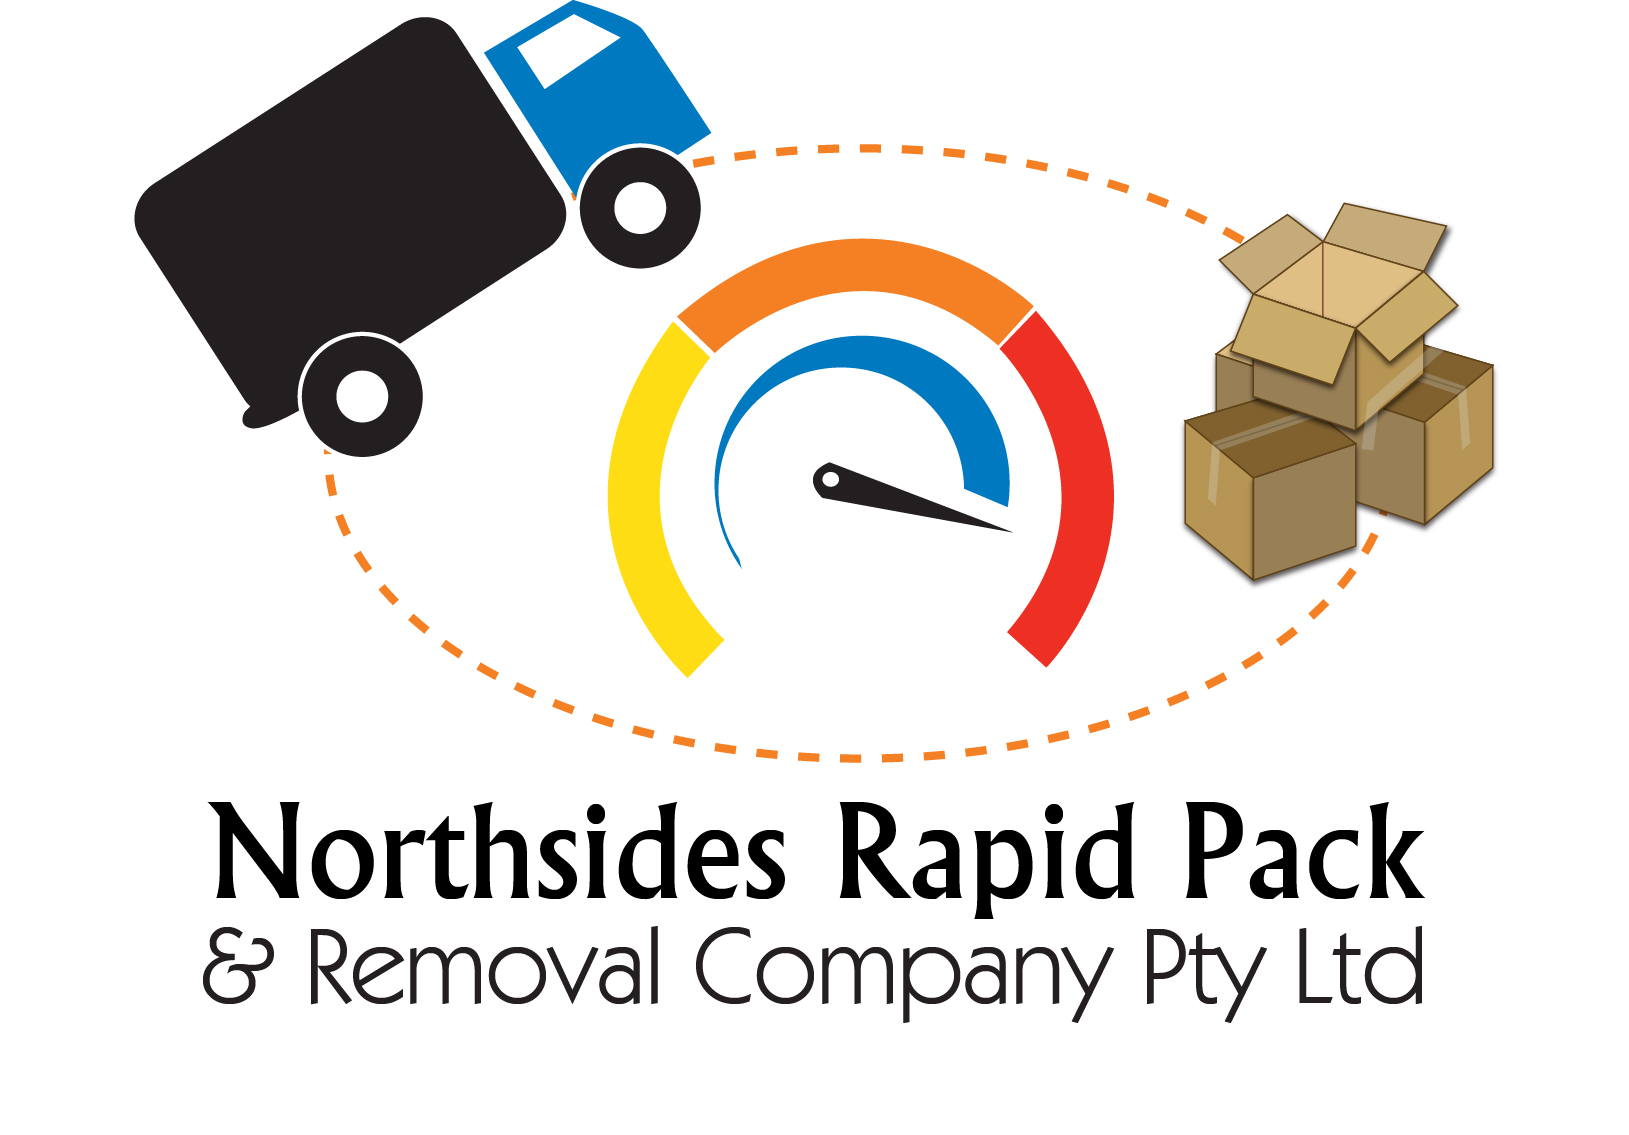 Northsides Rapid Pack & Removal Company Pty Ltd